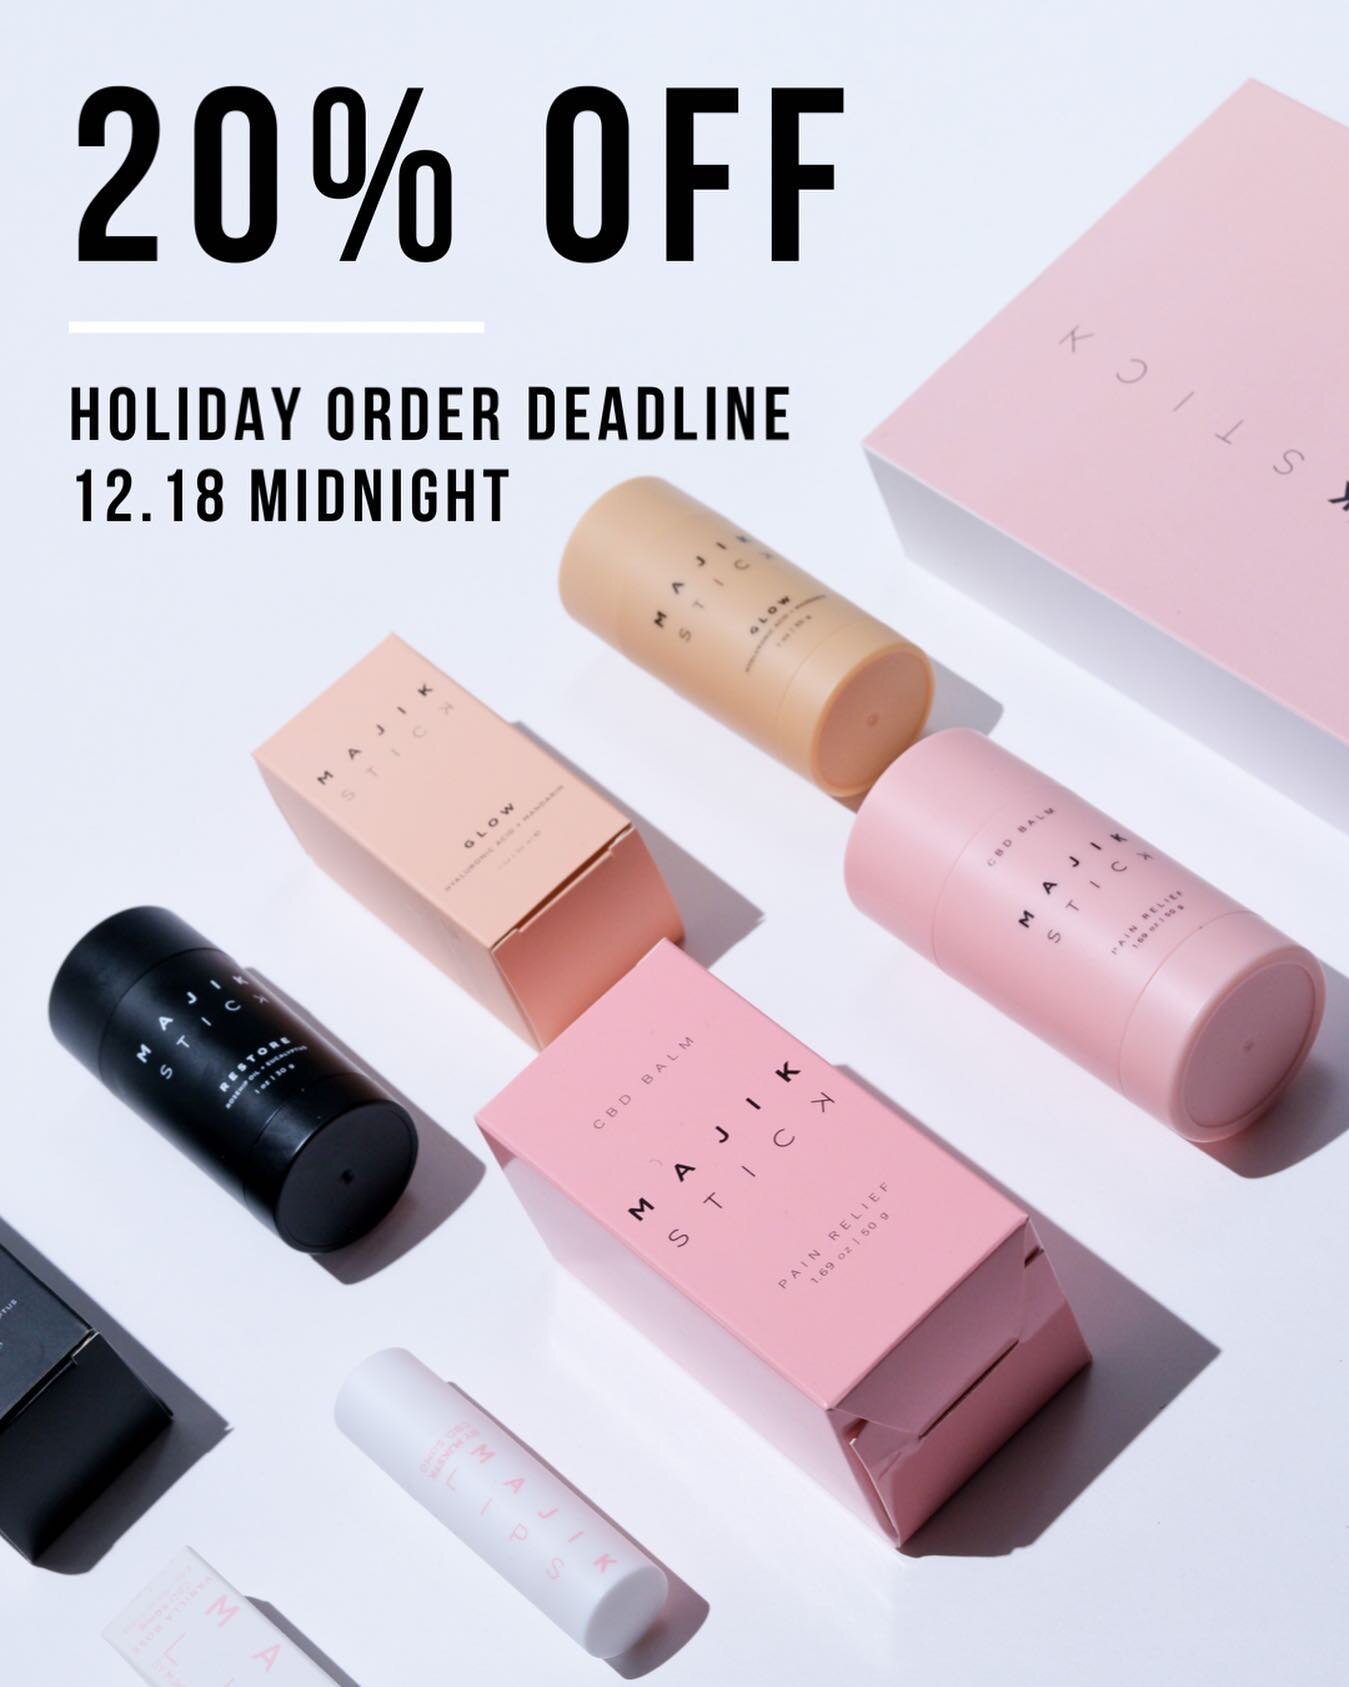 There&rsquo;s still time to give the gift of MAJIK this holiday season and the deals haven&rsquo;t ended yet - Order by SUN DEC 18TH at MIDNIGHT PST to guarantee delivery by the holidays and enjoy 20% OFF ❄️📦

Shop WWW.MAJIKSTICK.COM and use code HO